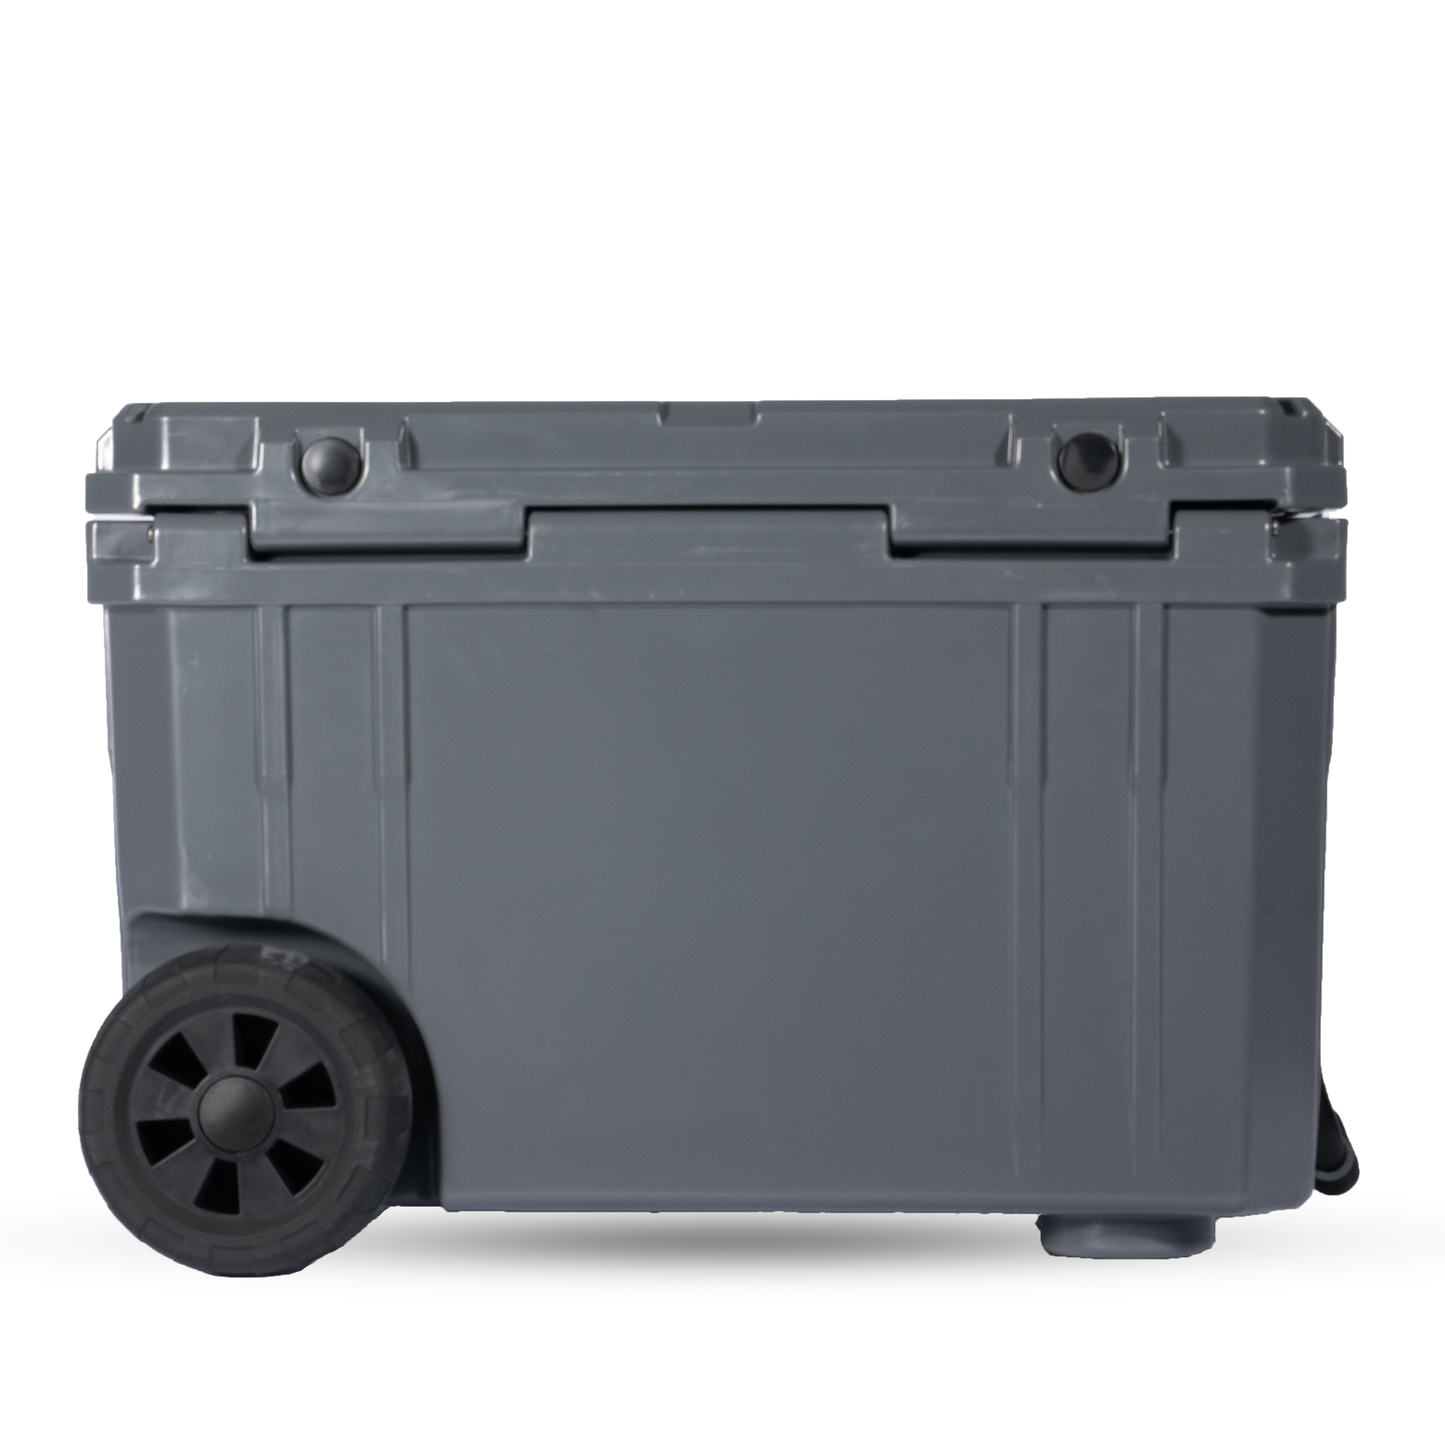 55QT Rolling Rugged Cooler by ROAM Adventure Co.